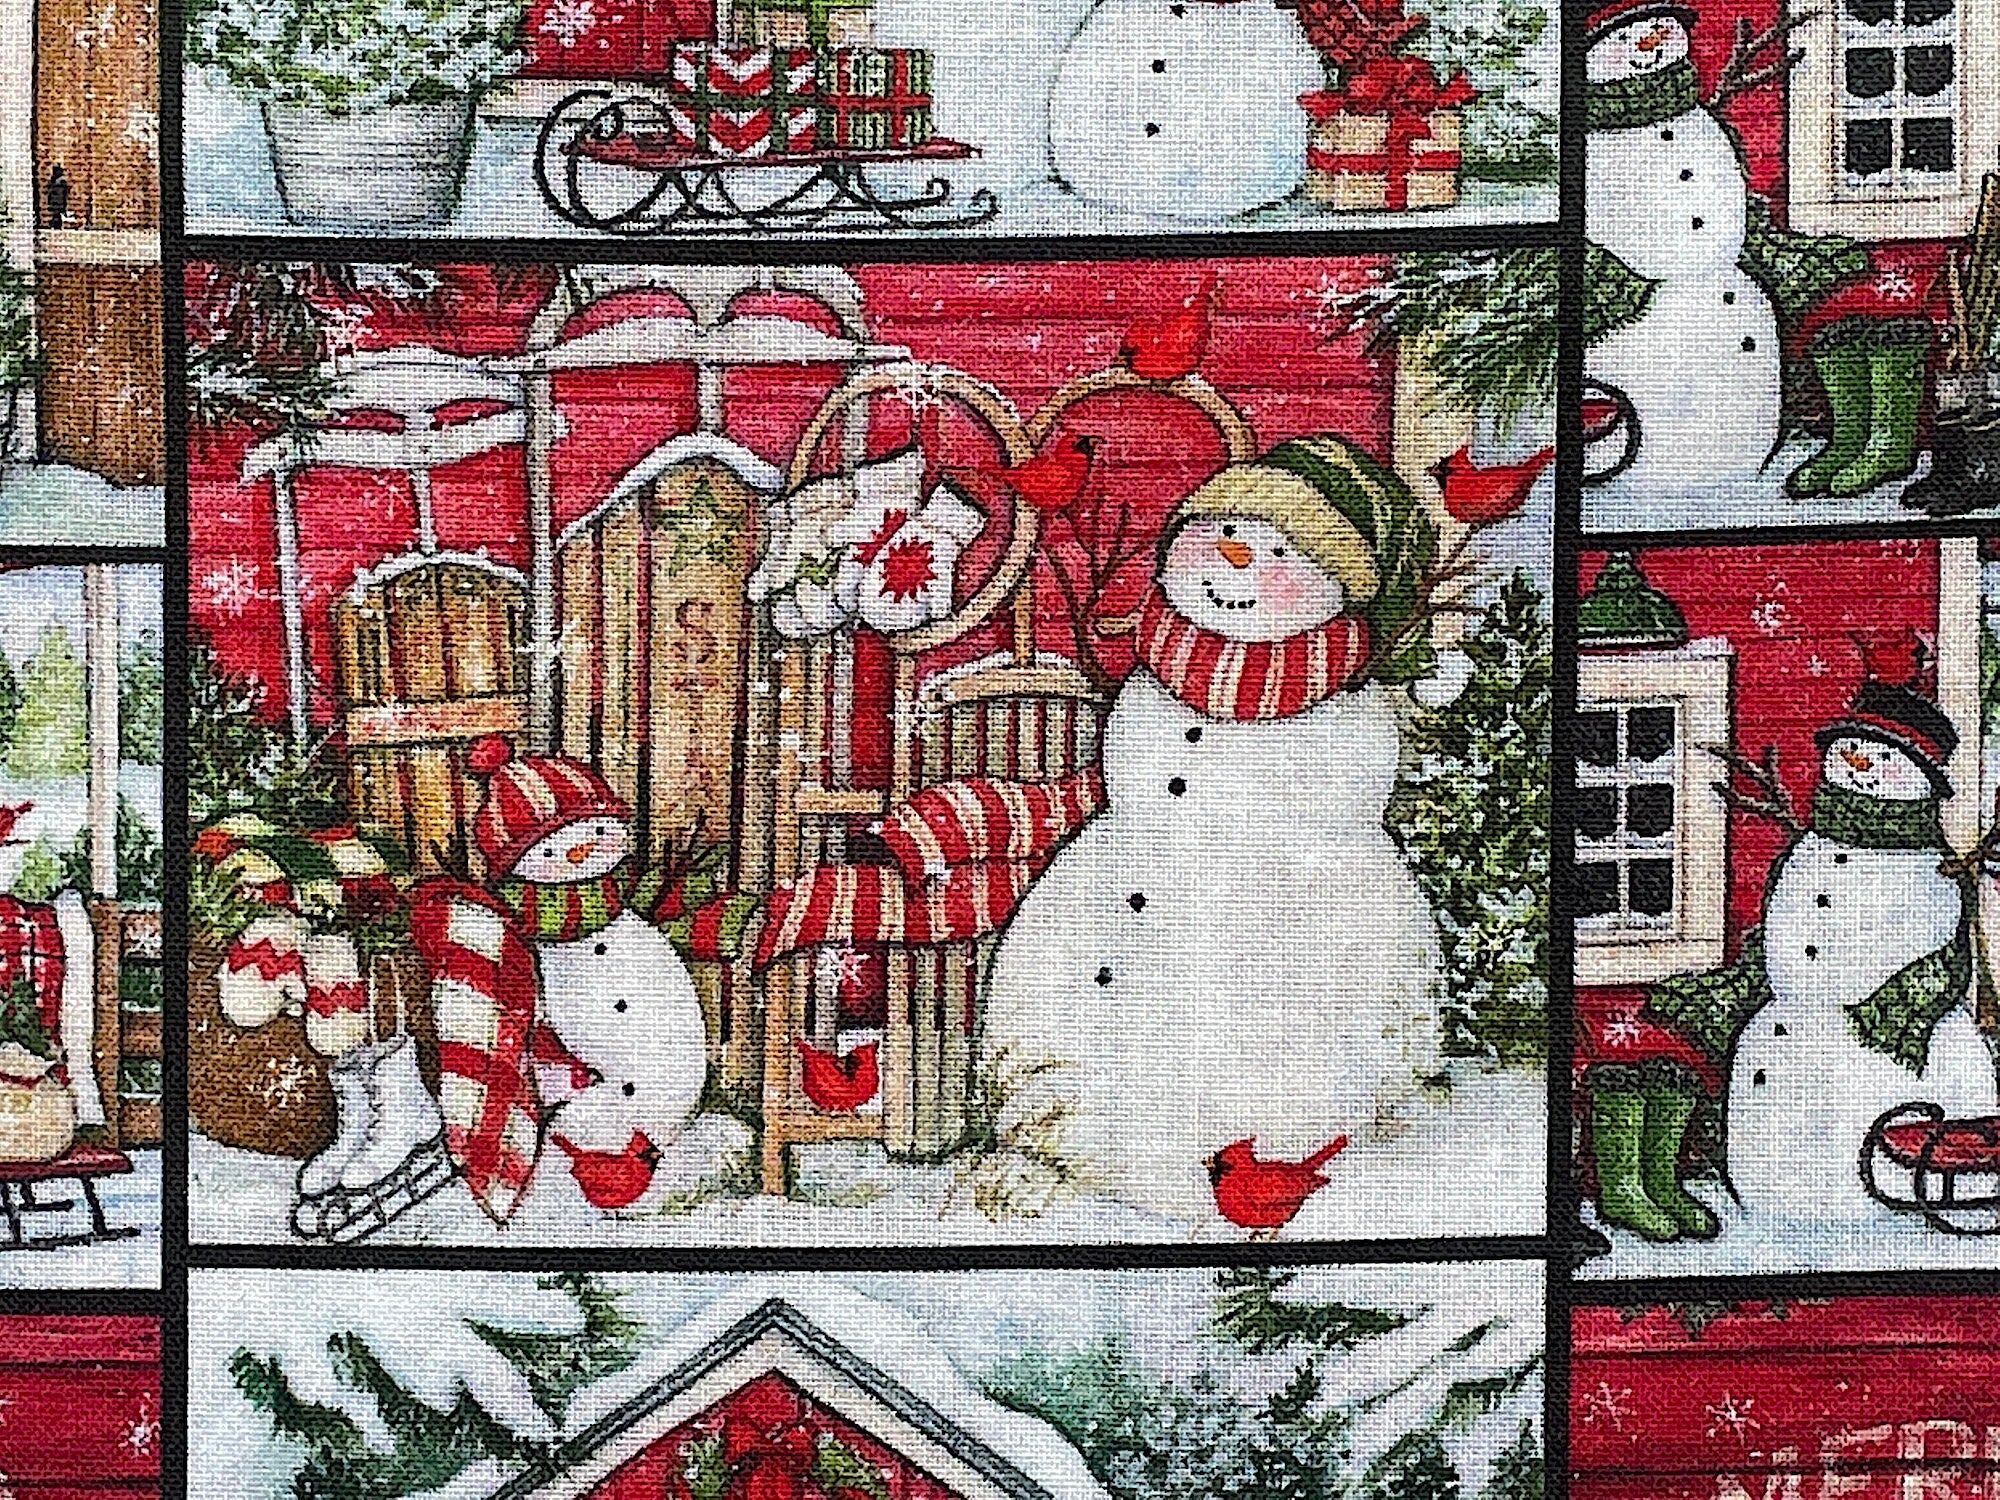 Close up of snowmen, sleighs, ice skates, birds and more.